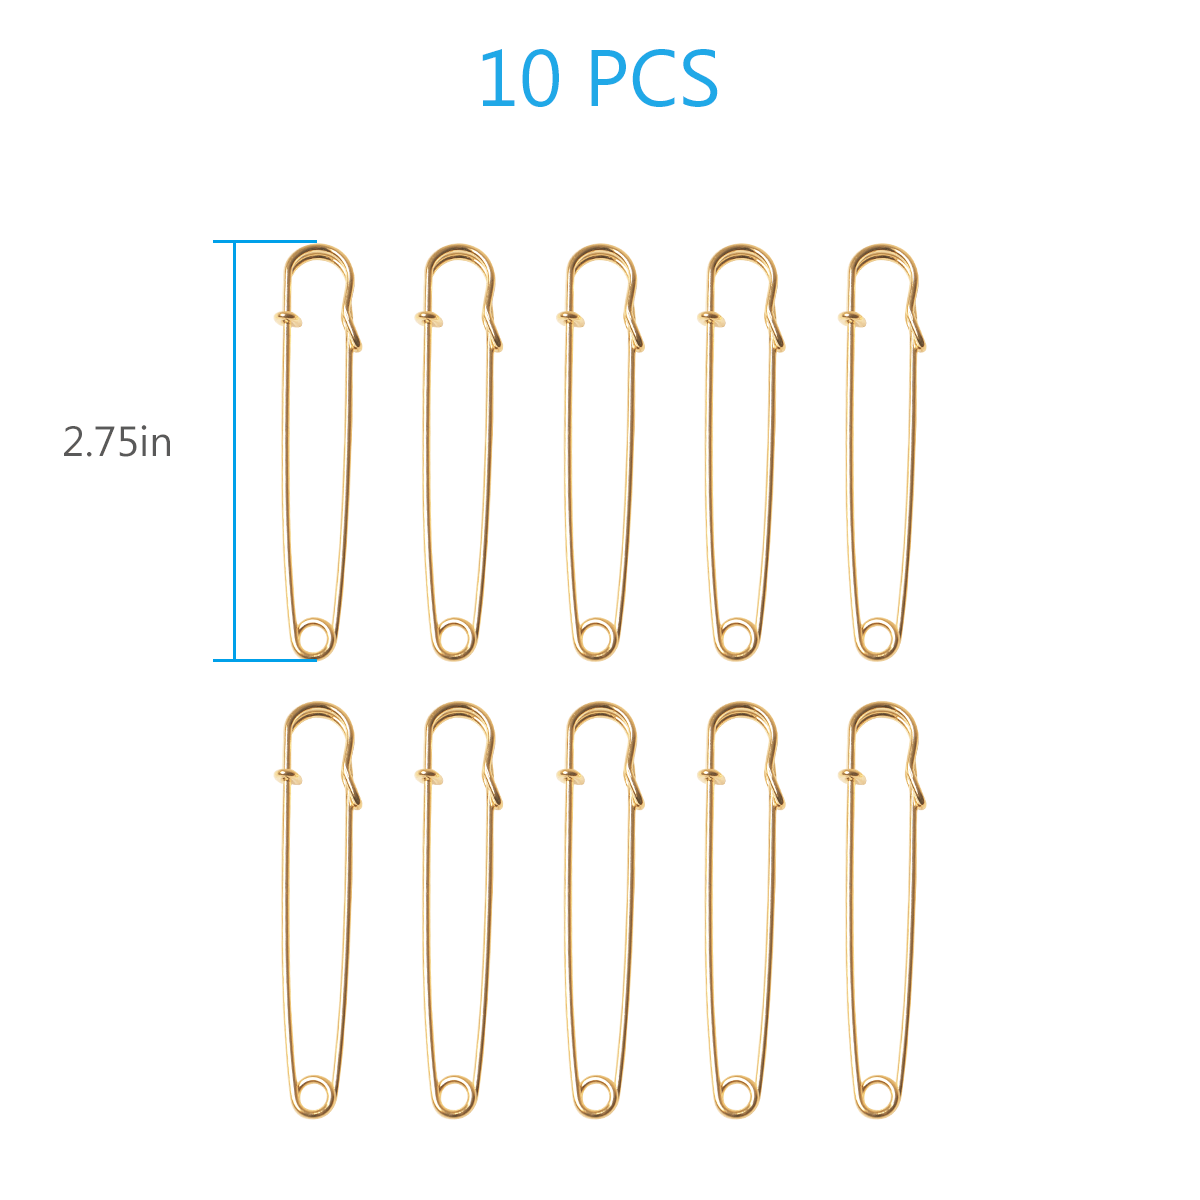 10 PCS 4 Inch Large Metal Safety Pin--Big and Strong Enough to Hold  Heavy-Weight Fabrics and Materials Canvas, Leather, Upholstery 